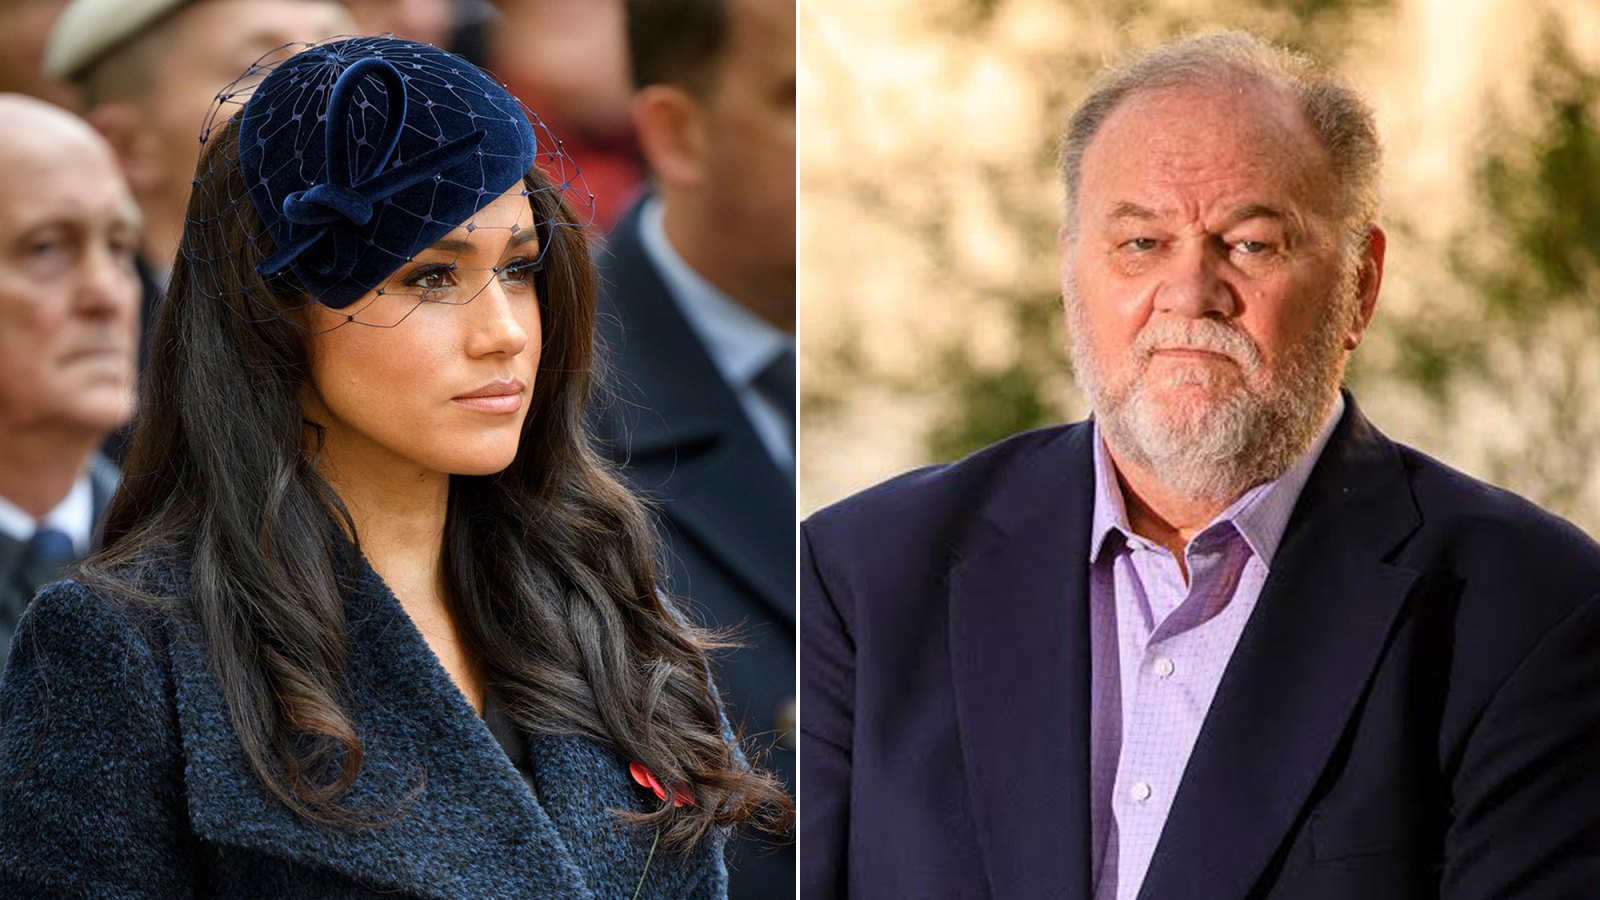 Meghan Markle's Dad Thomas Markle Fears He Won't Ever See Her Again